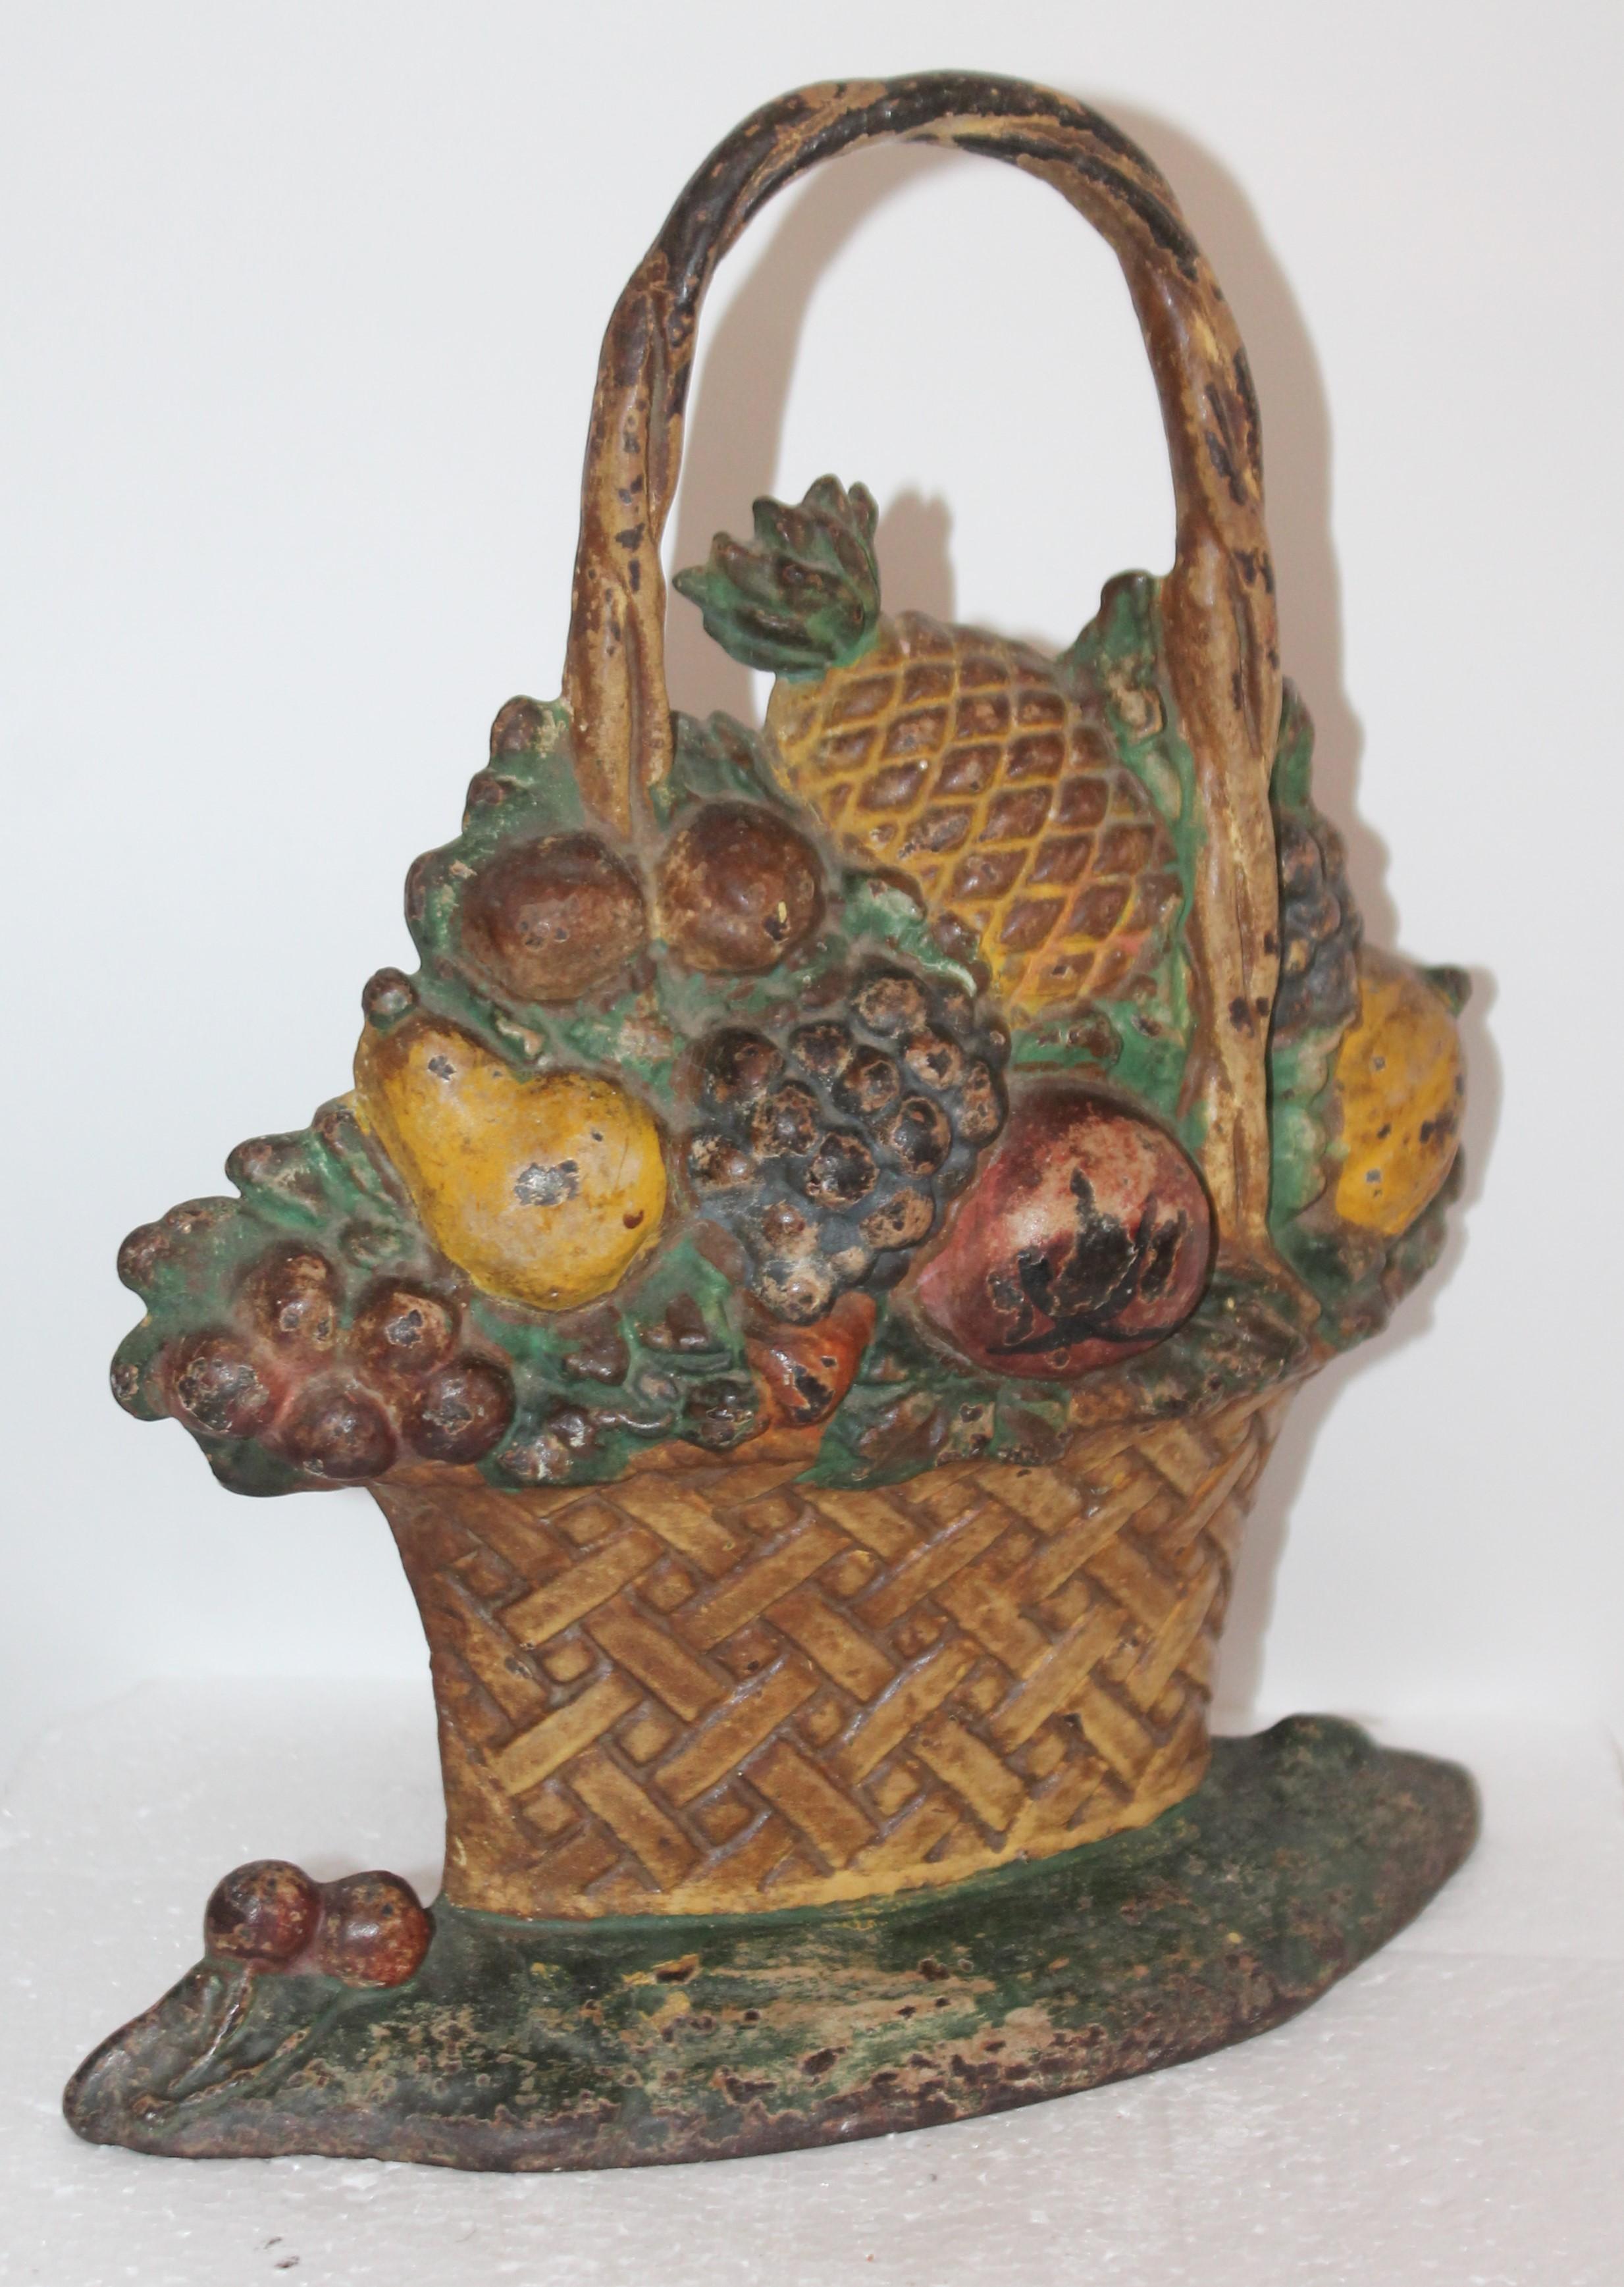 This 19th century Hubley original painted basket of fruit cast iron door stop is in fine untouched condition. So hard to find where they have not messed with the paint. Great form and super patina.